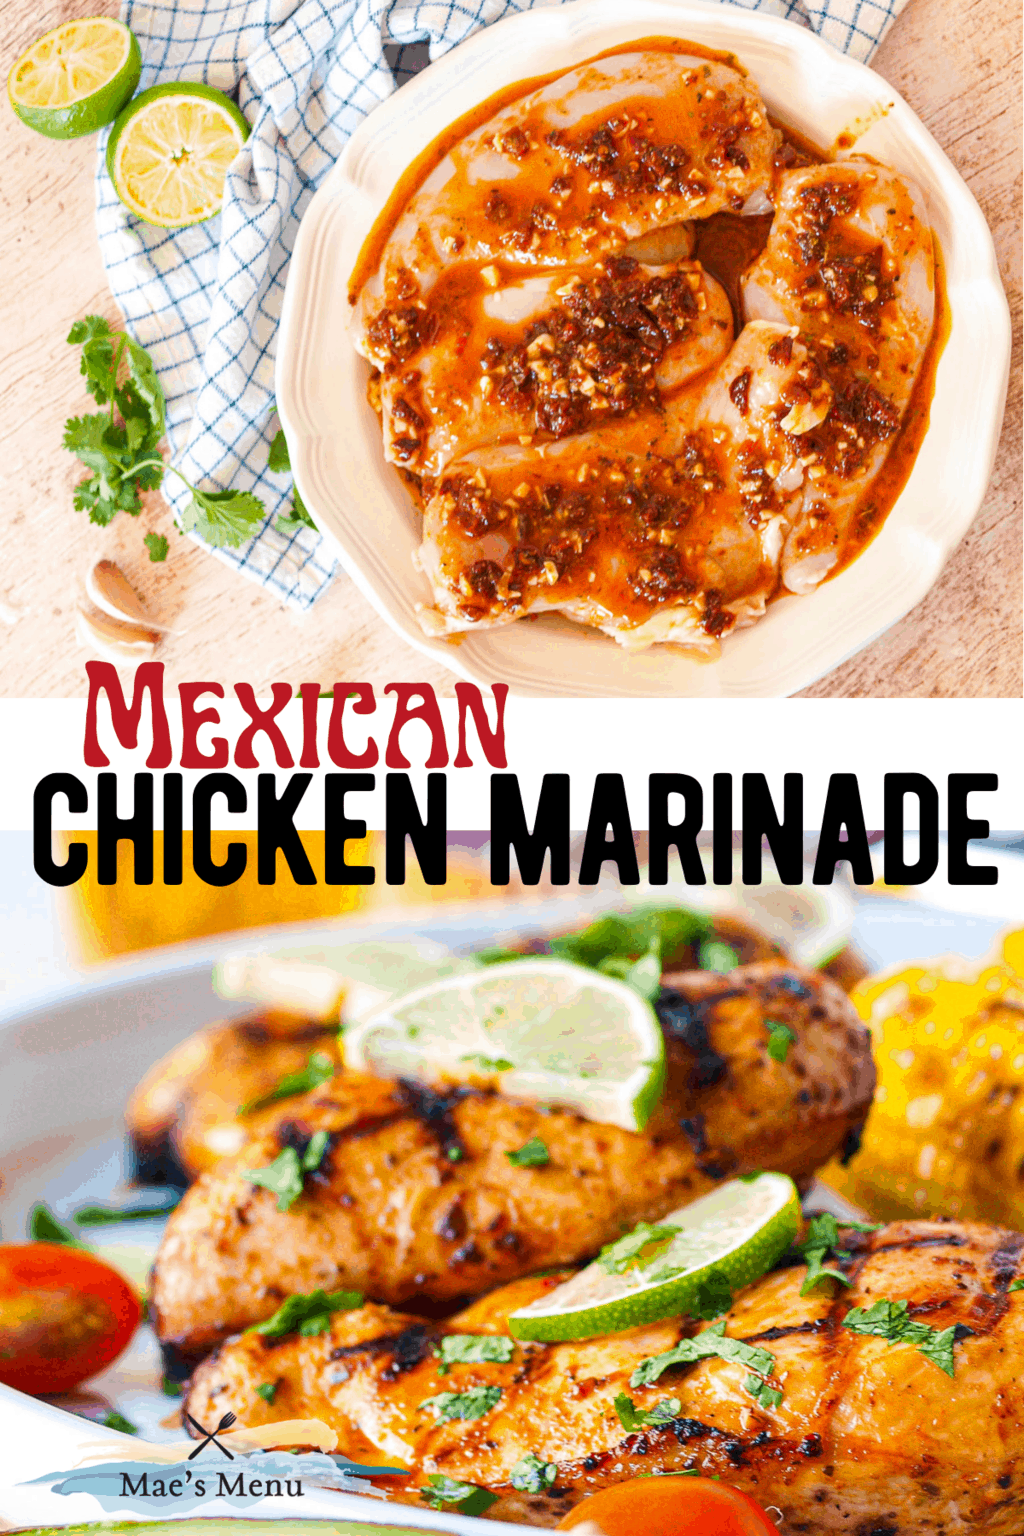 A pinterest pin for mexican chicken marinade. on the top is a picture of the chicken in the marinade. On the bottom is the grilled chicken on a serving platter.